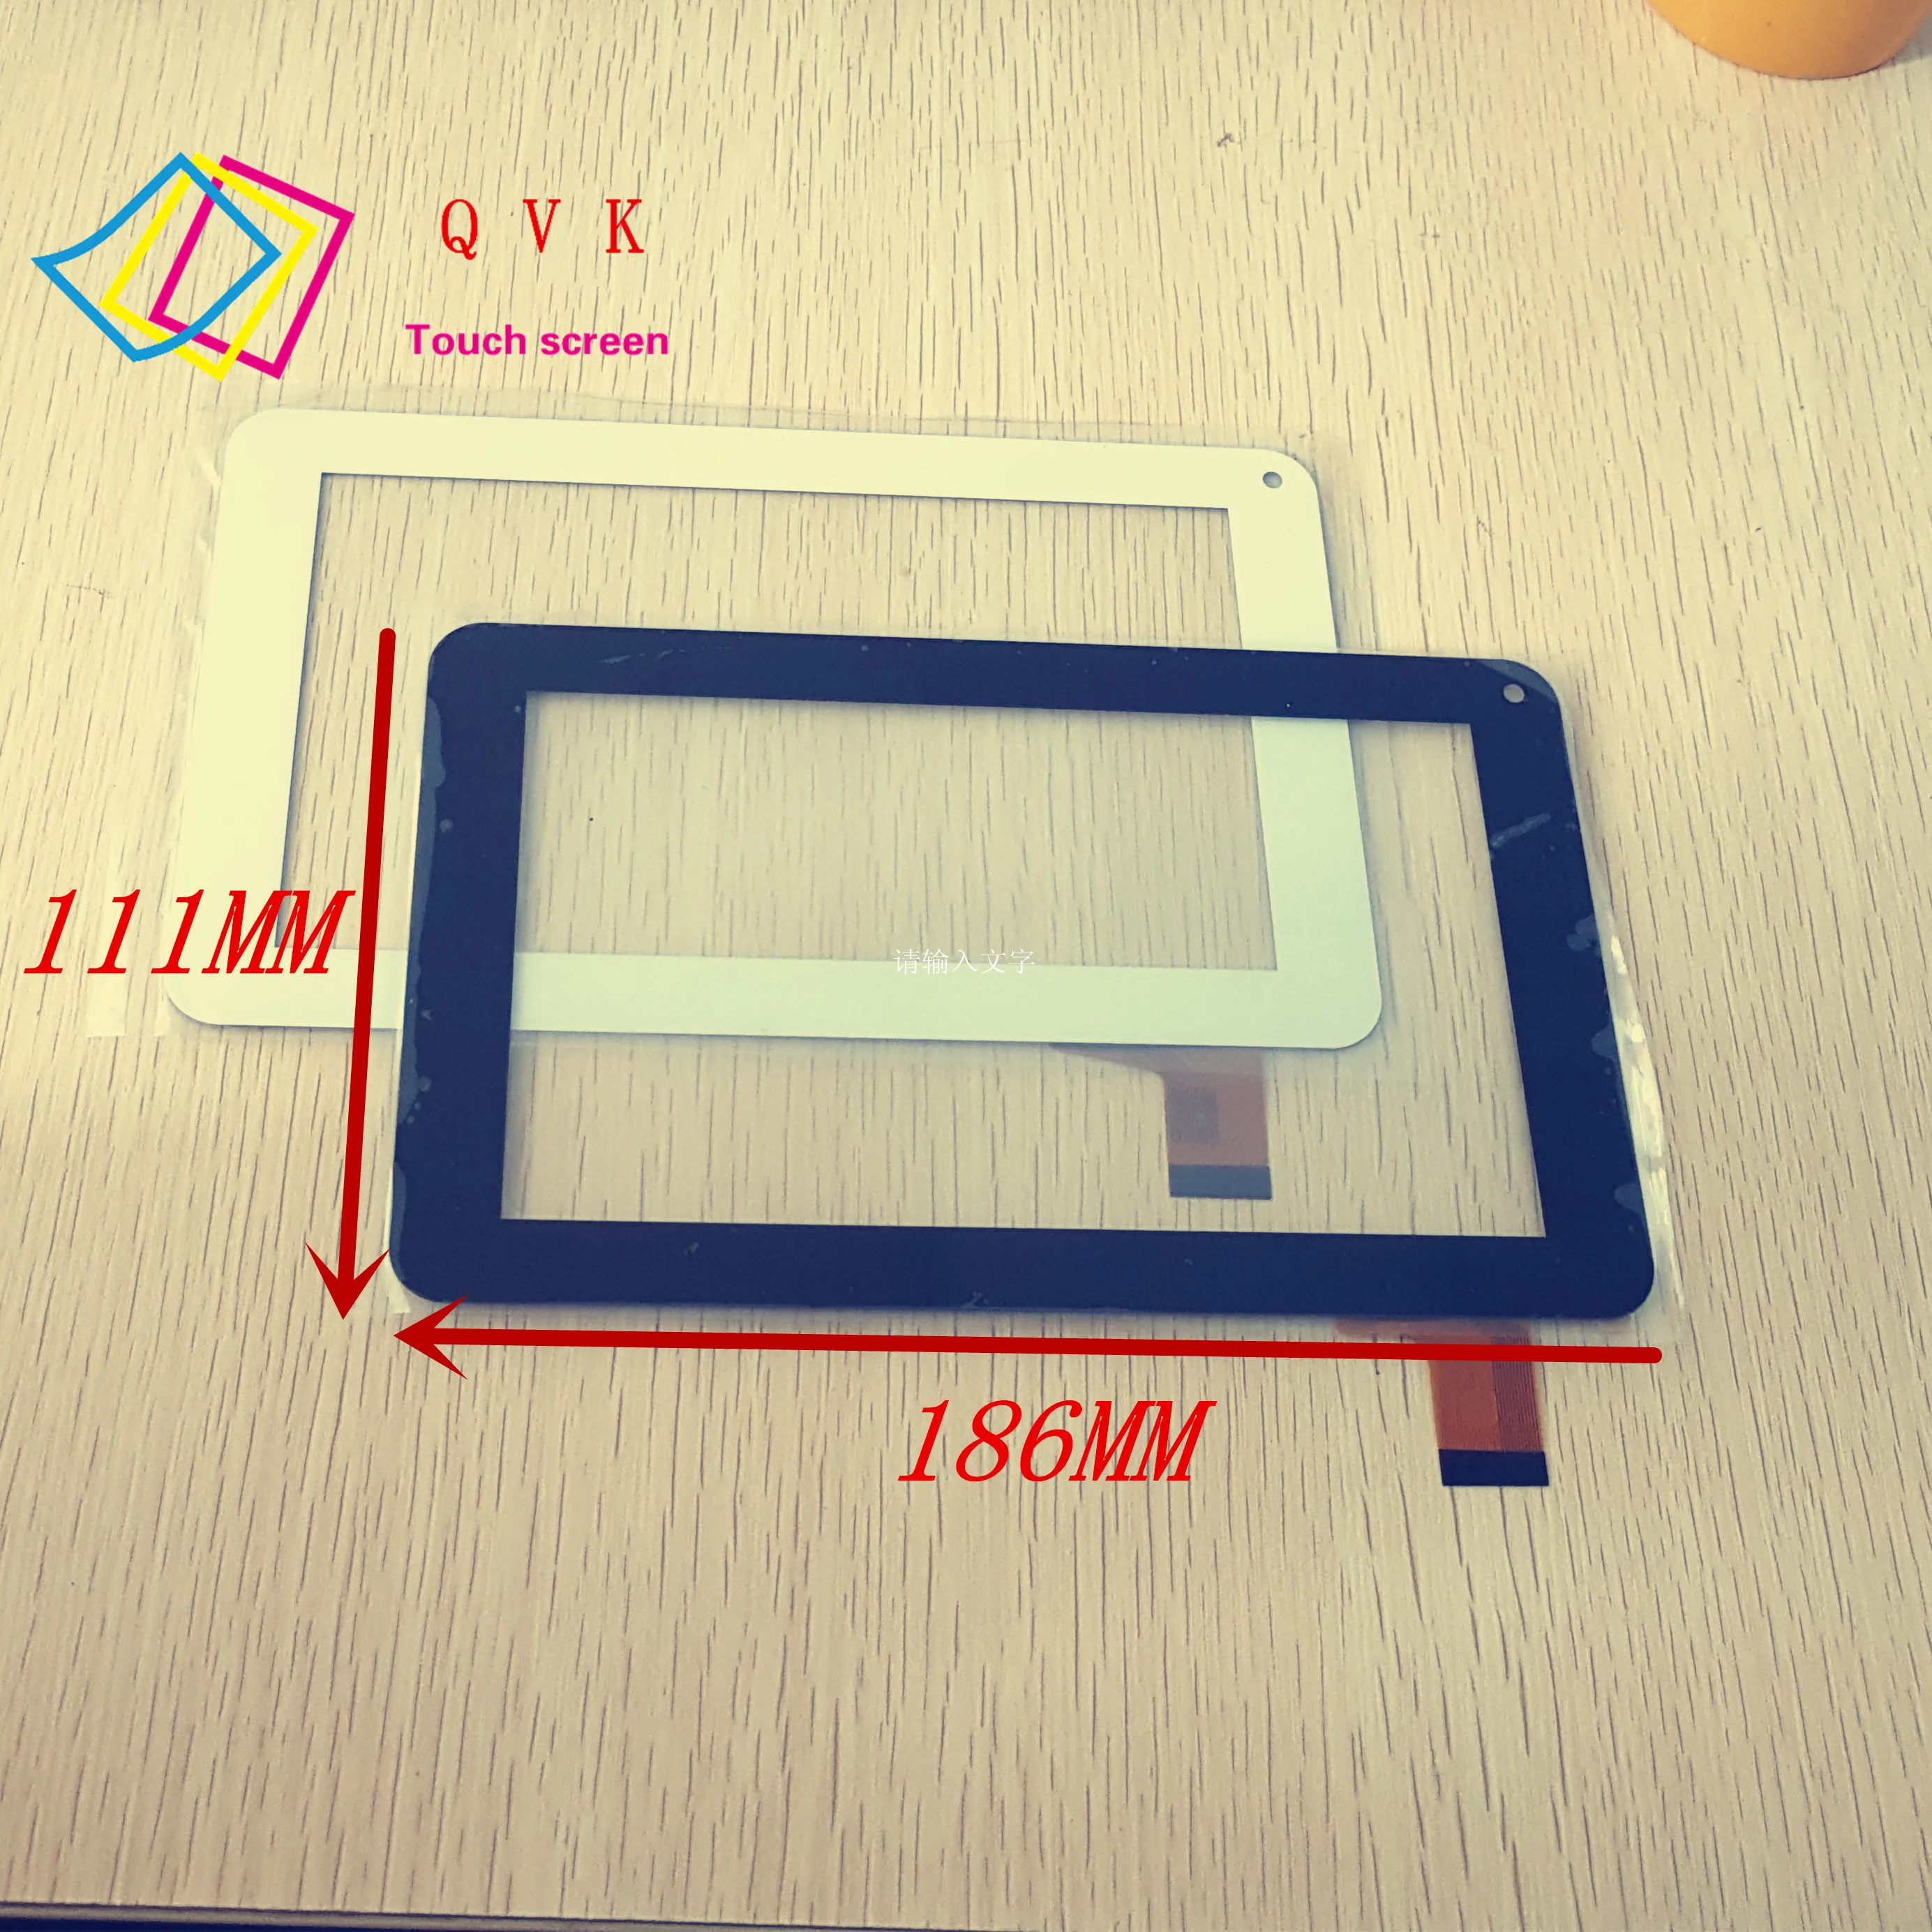 

2pcS 7" 7inch capacitive touch panel touch screen glass for A10 A13 tablet pc DPT 300 - N3803K - A00 - V1.0 FM700405KA